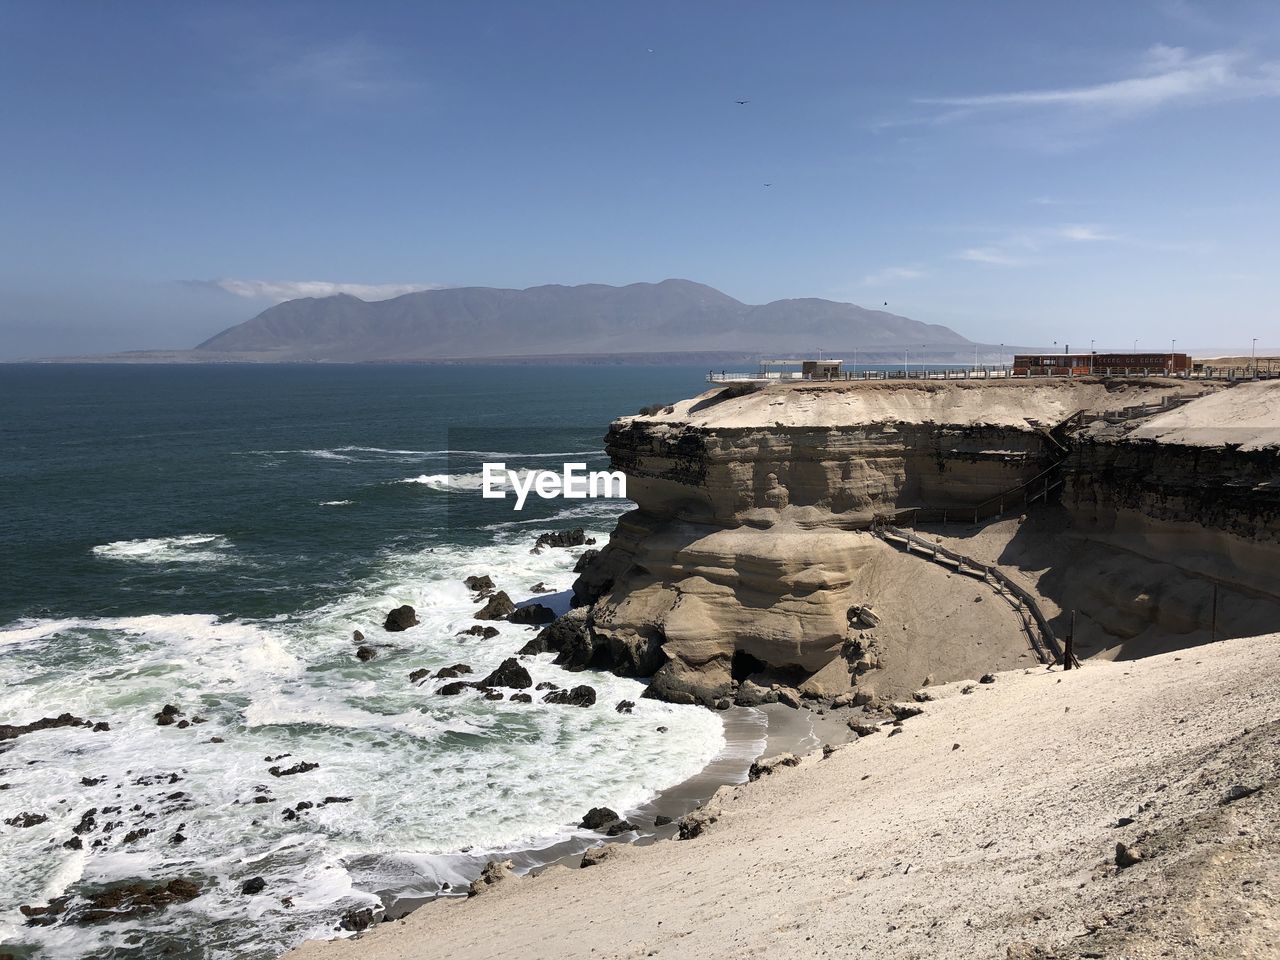 sea, water, land, beach, coast, sky, ocean, rock, shore, scenics - nature, nature, body of water, cliff, beauty in nature, wave, terrain, travel destinations, environment, coastline, travel, mountain, landscape, vacation, no people, architecture, sand, tourism, outdoors, motion, bay, tranquility, day, cove, cloud, tranquil scene, holiday, blue, sports, trip, sunny